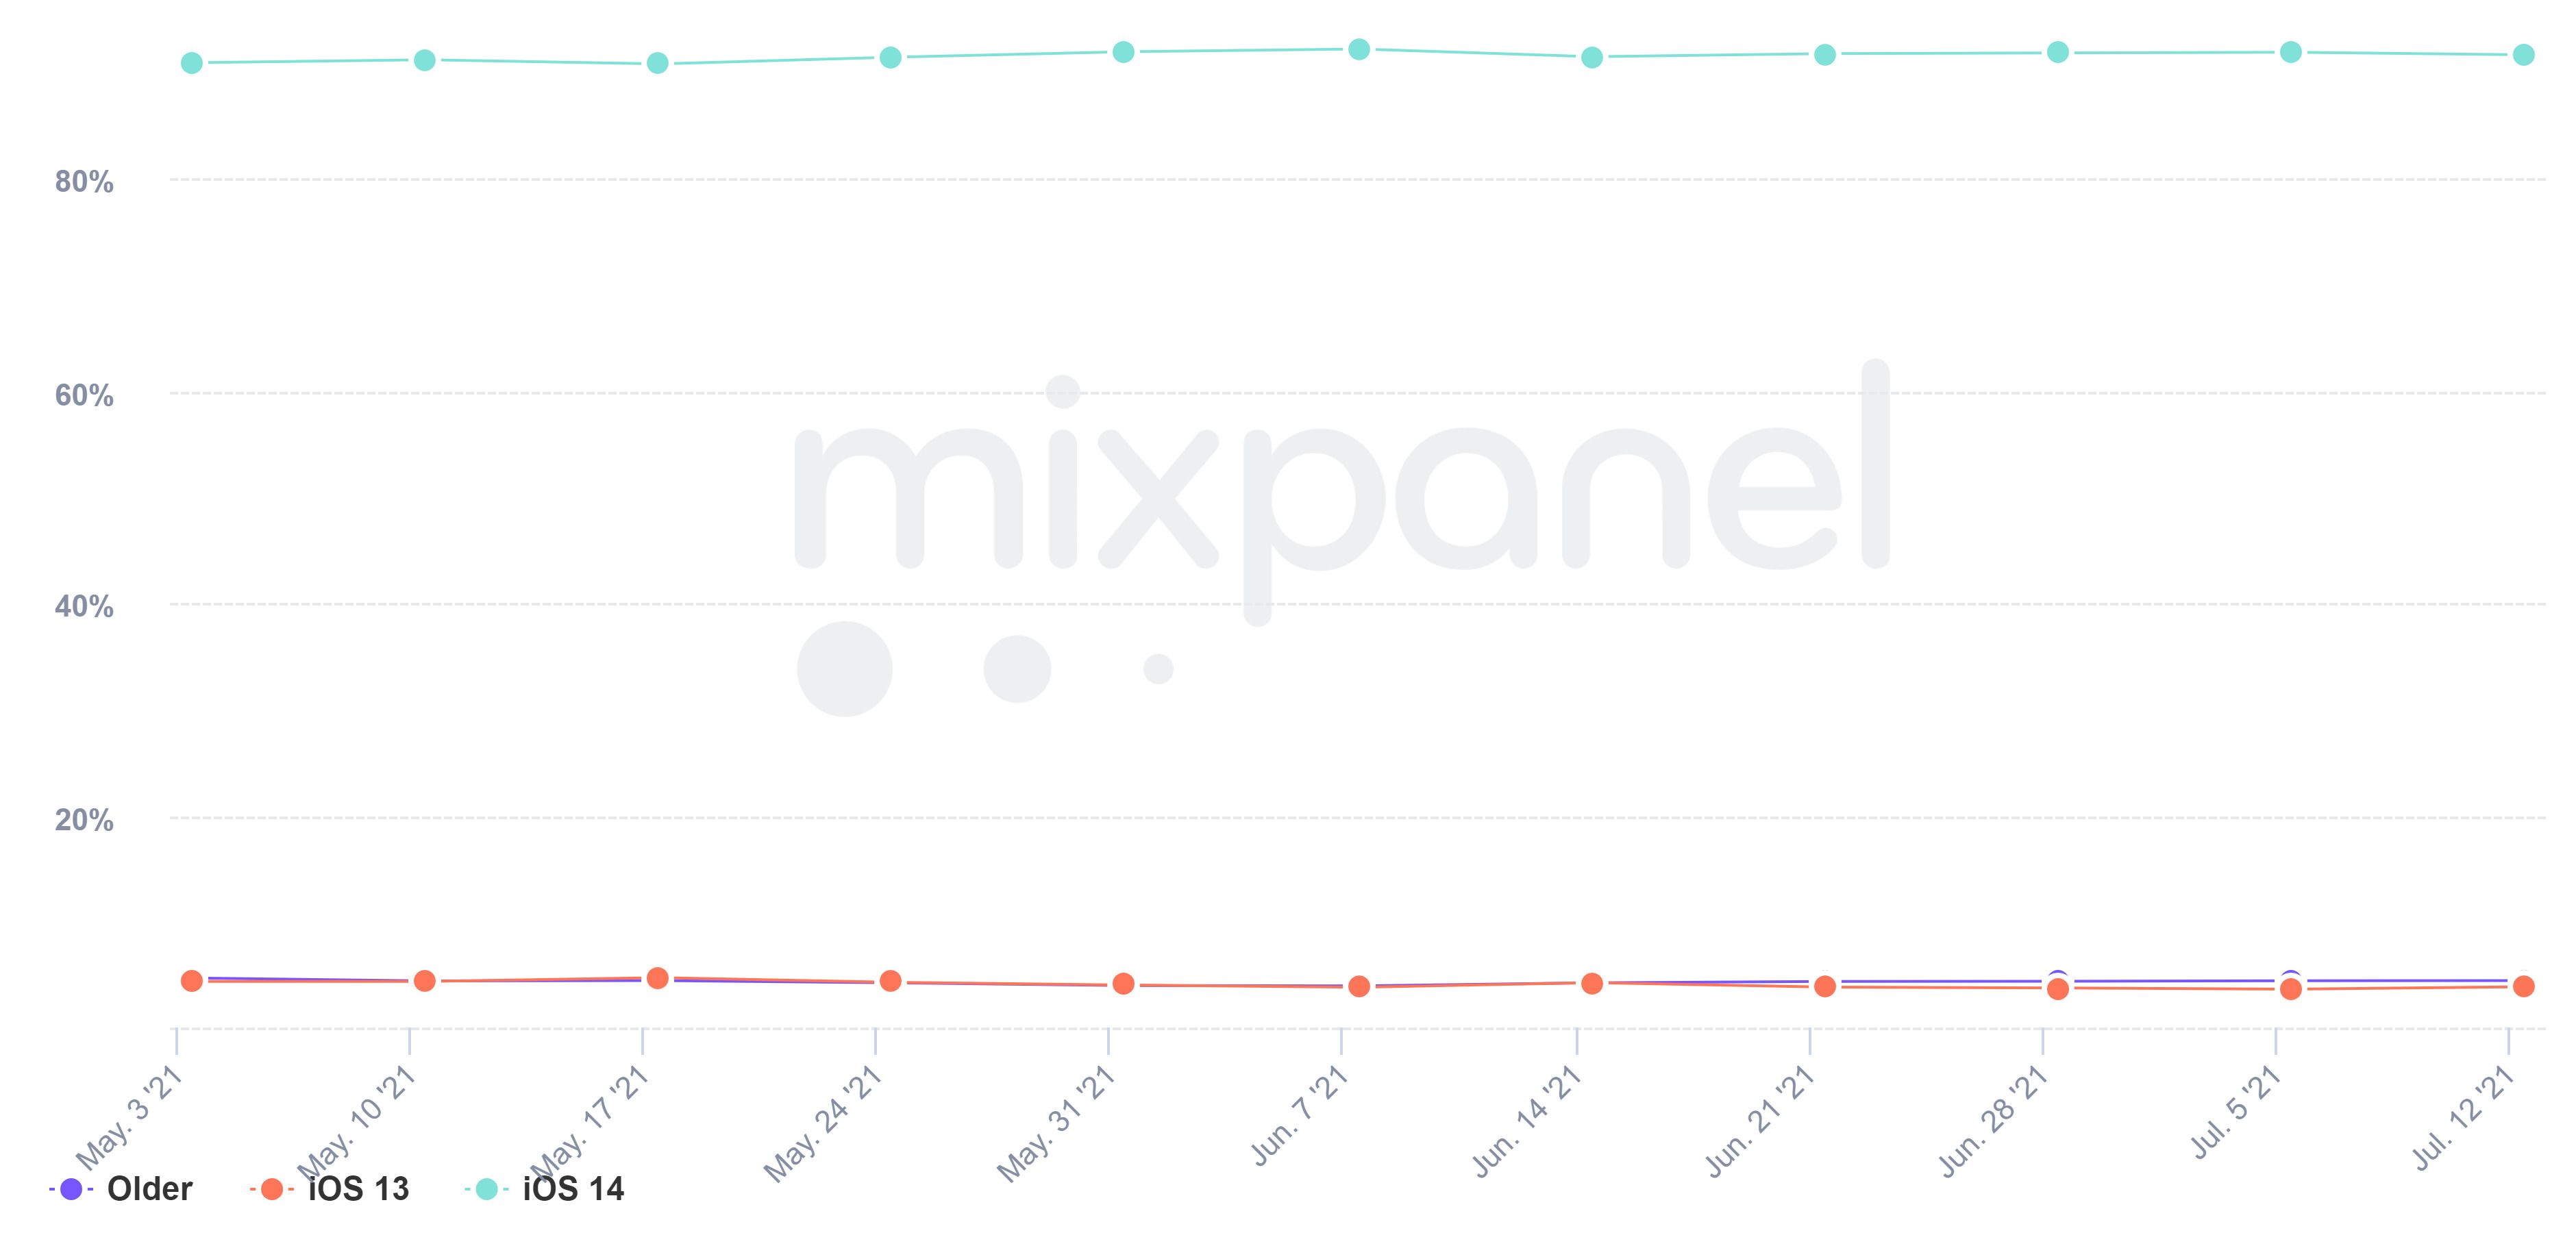 If you decide to convert an android app to iOS, it’s important to pay attention to iOS and android version differences (*image by [Mixpanel](https://mixpanel.com/trends/#report/ios_14/from_date:-70,report_unit:week,to_date:0){ rel="nofollow" target="_blank" .default-md}*)